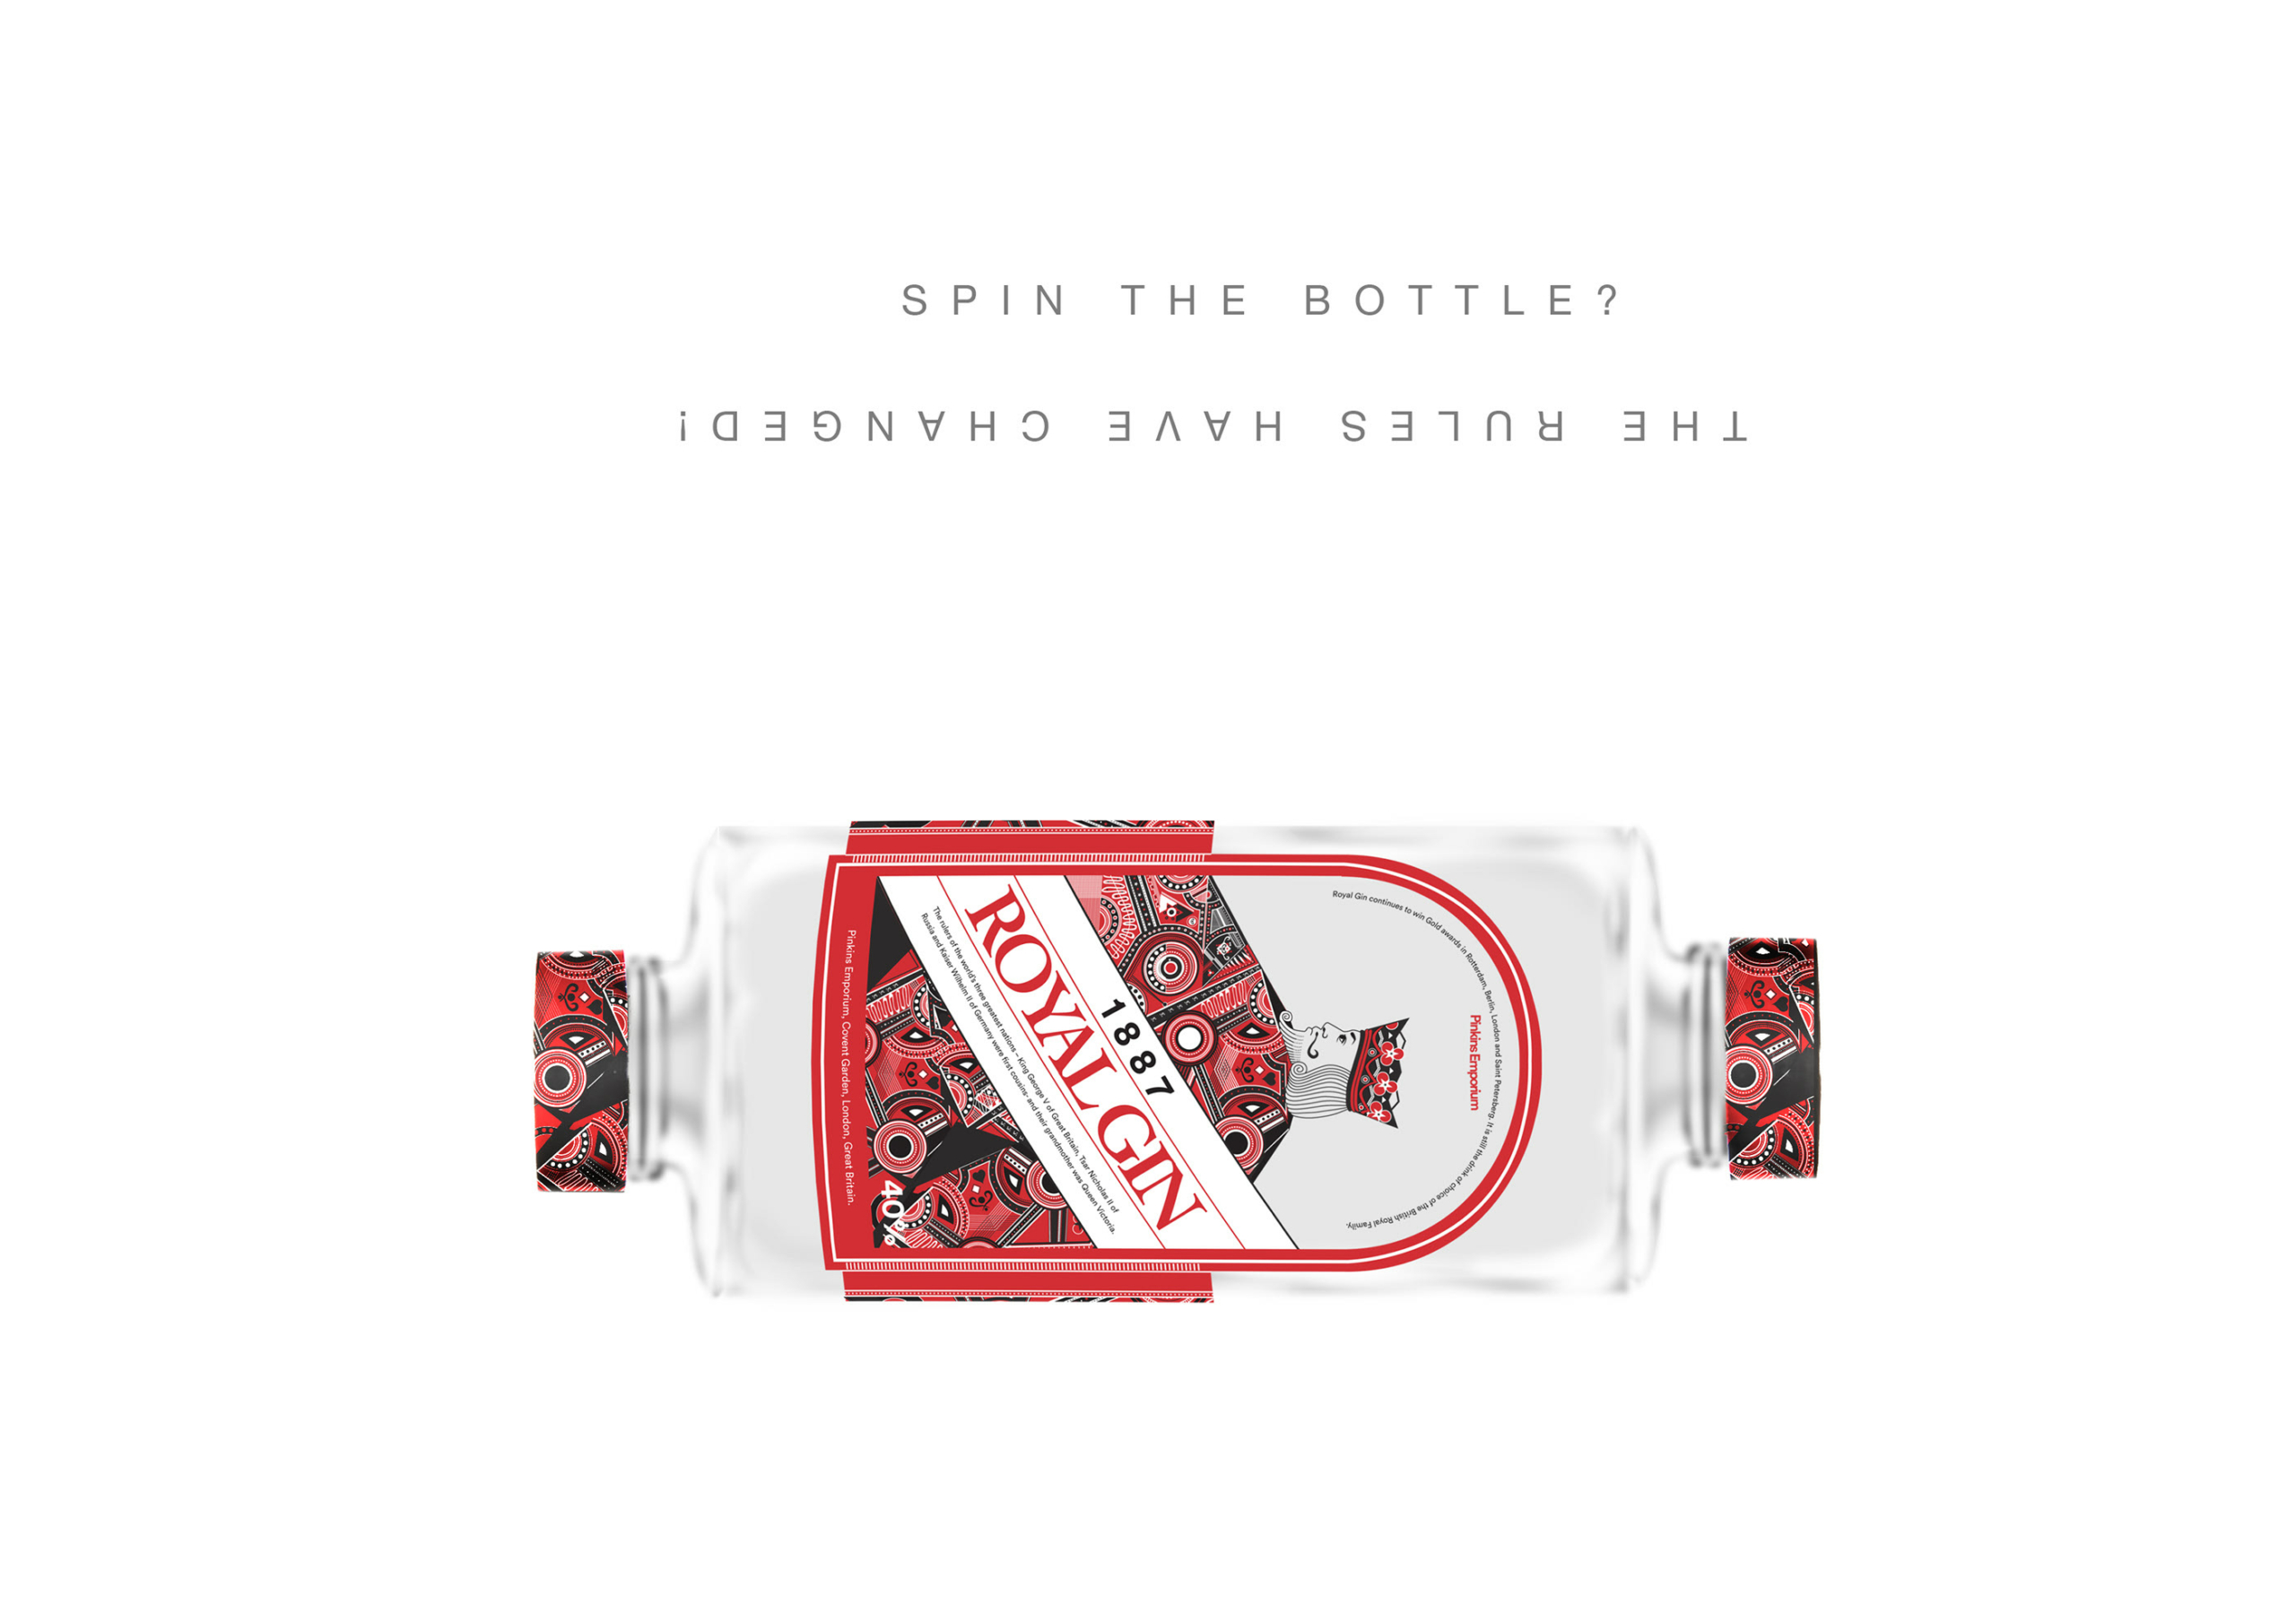 Spin the bottle